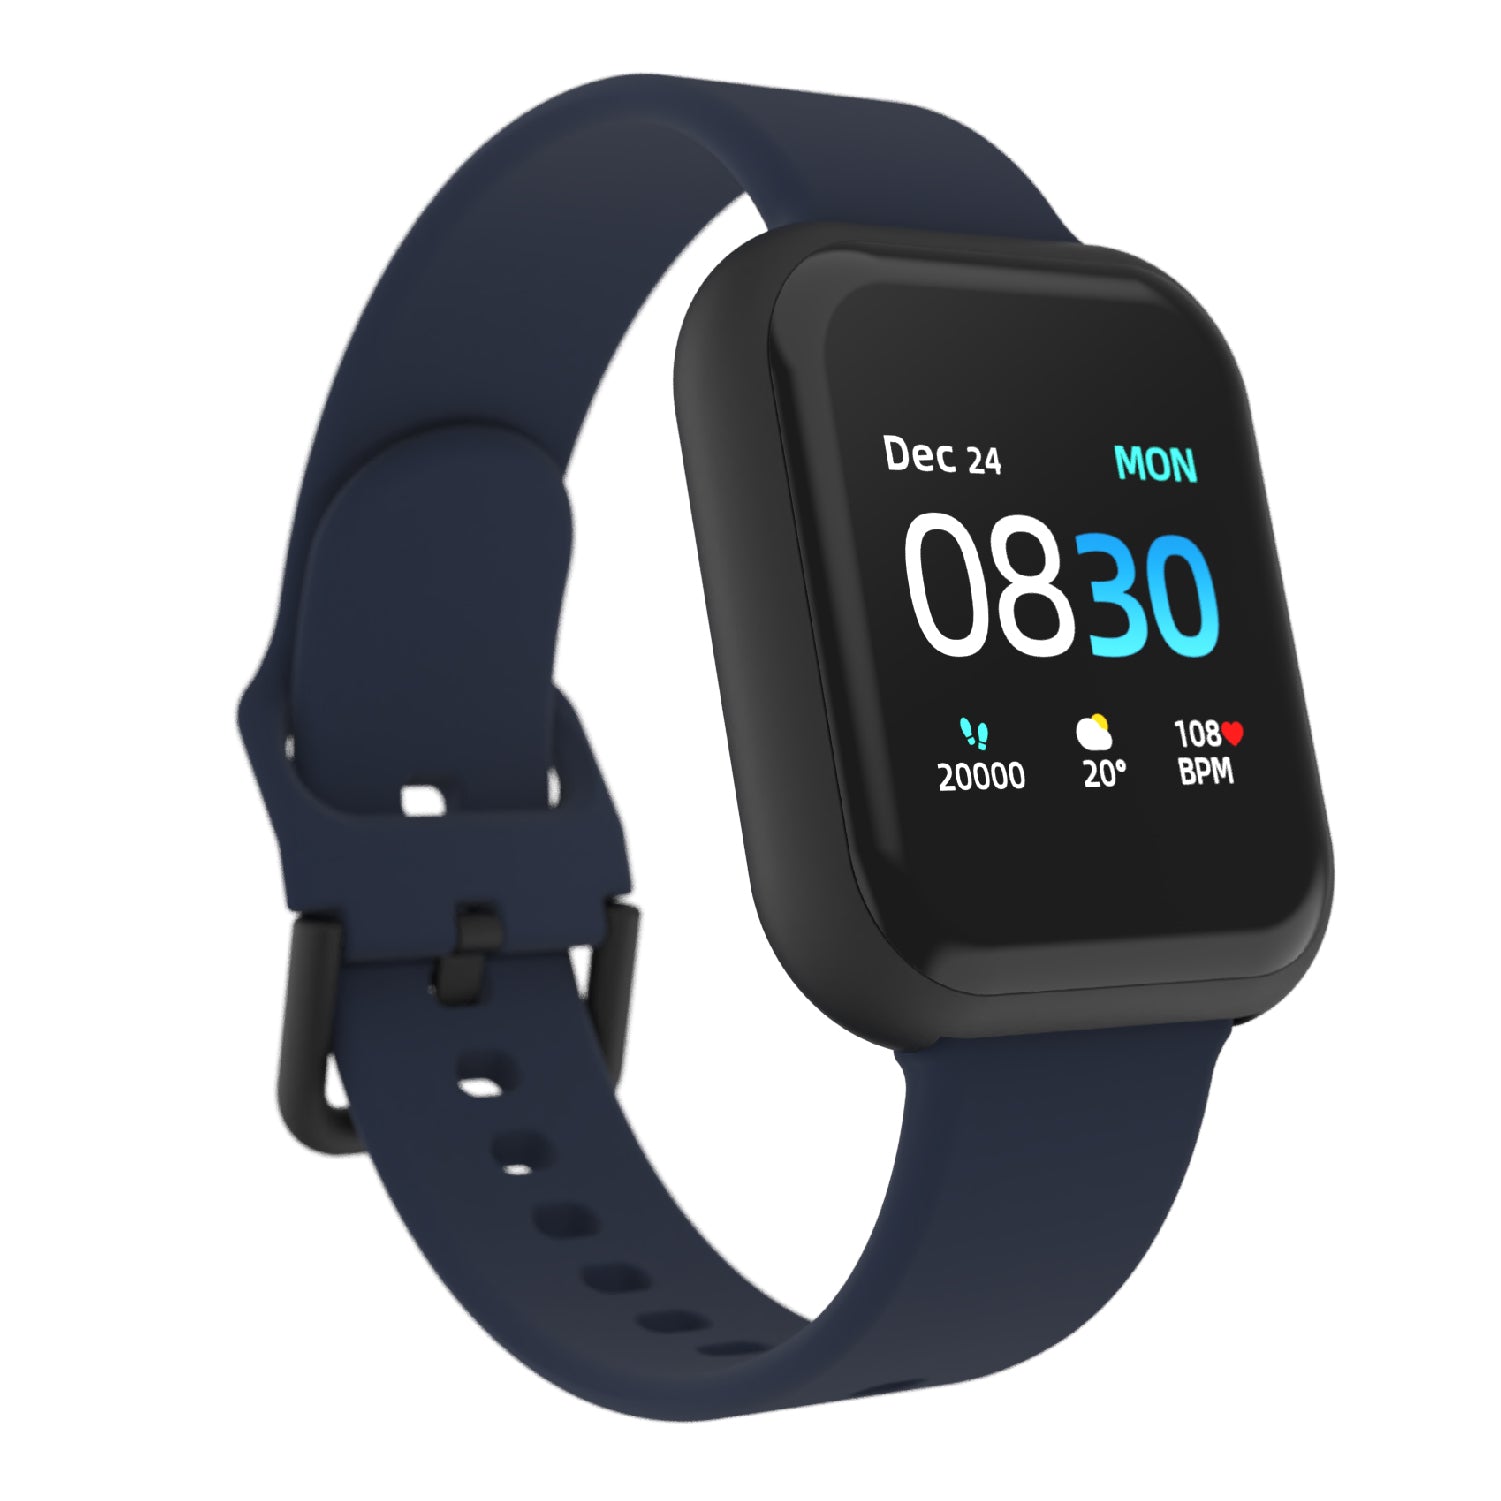 iTouch Air 3 Smartwatch in Black with Navy Strap